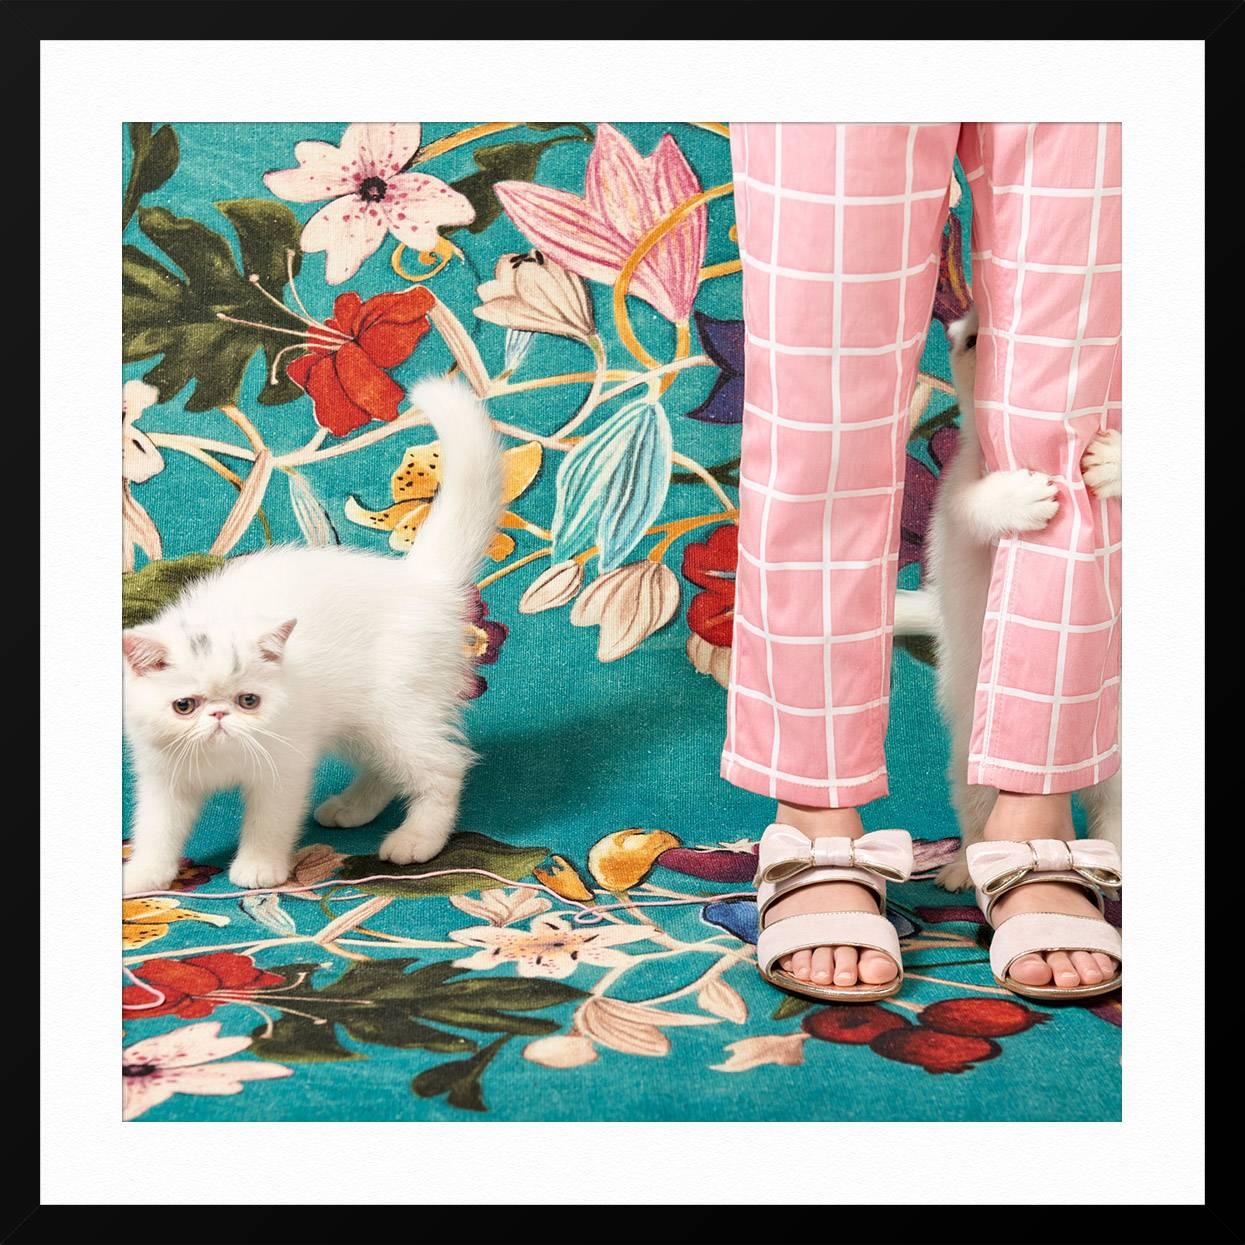 ABOUT THIS PIECE: The cat is a photographic series shot in Milan for Vogue Bambini in January 2016.

ABOUT THIS ARTIST: Carolina Mizrahi creates fantasy characters and set designs. Through the creation of her own constructed surreal world, Mizrahi